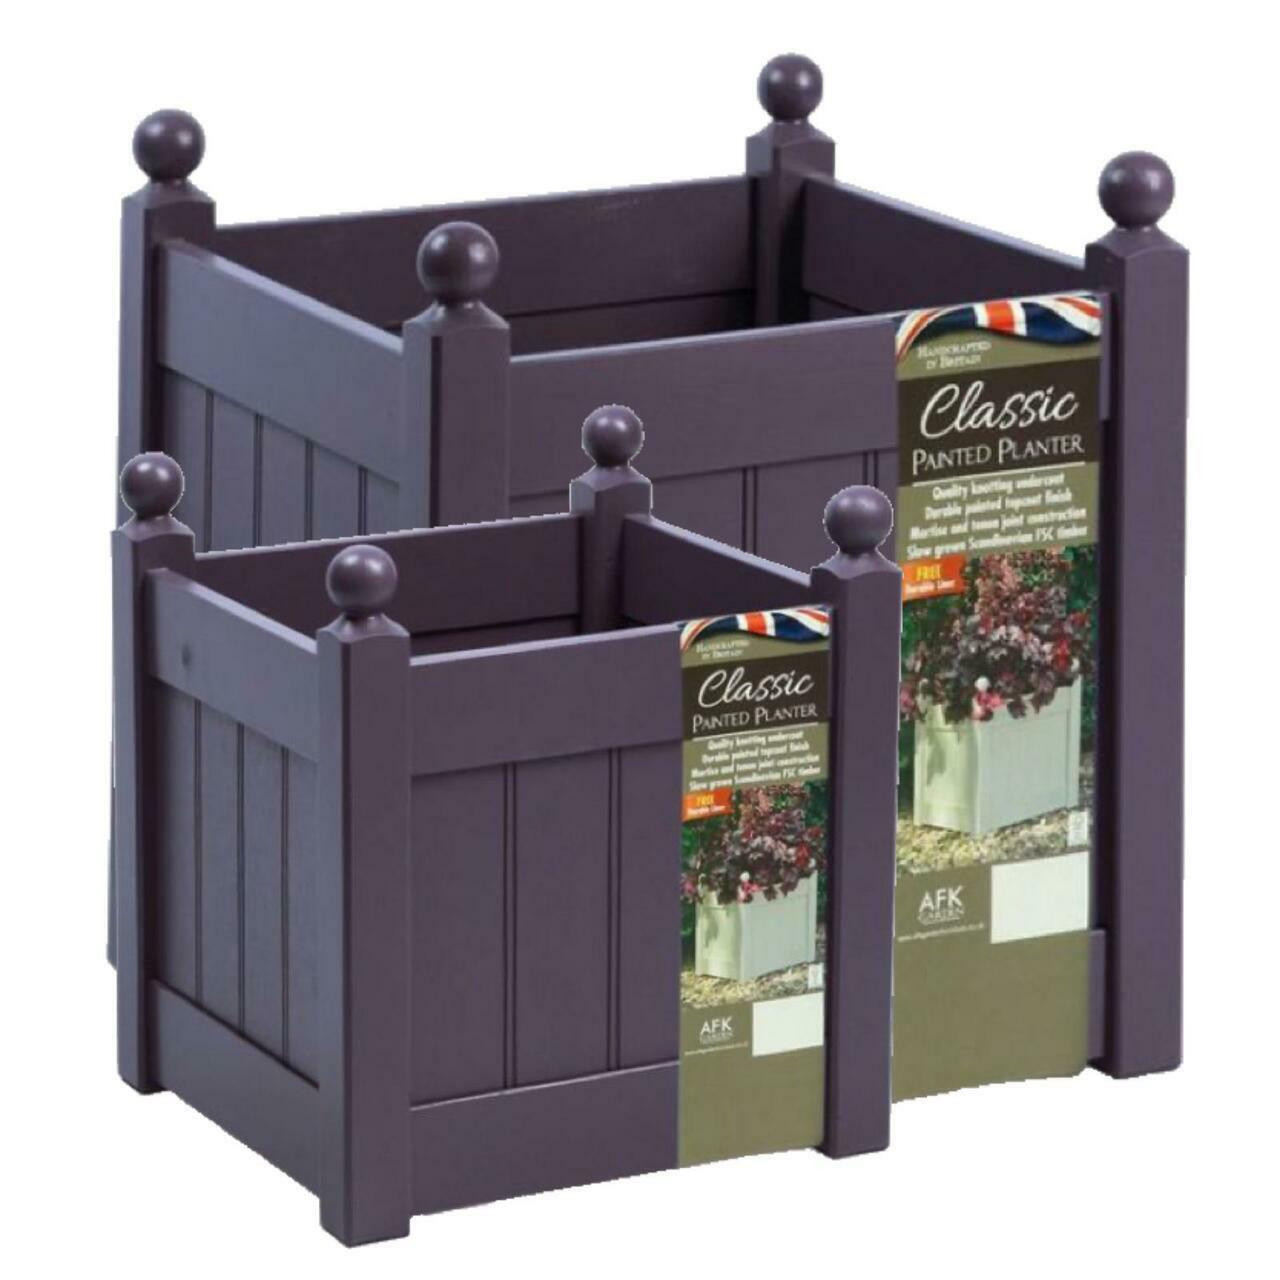 Classic Painted Planter Set in Lavender